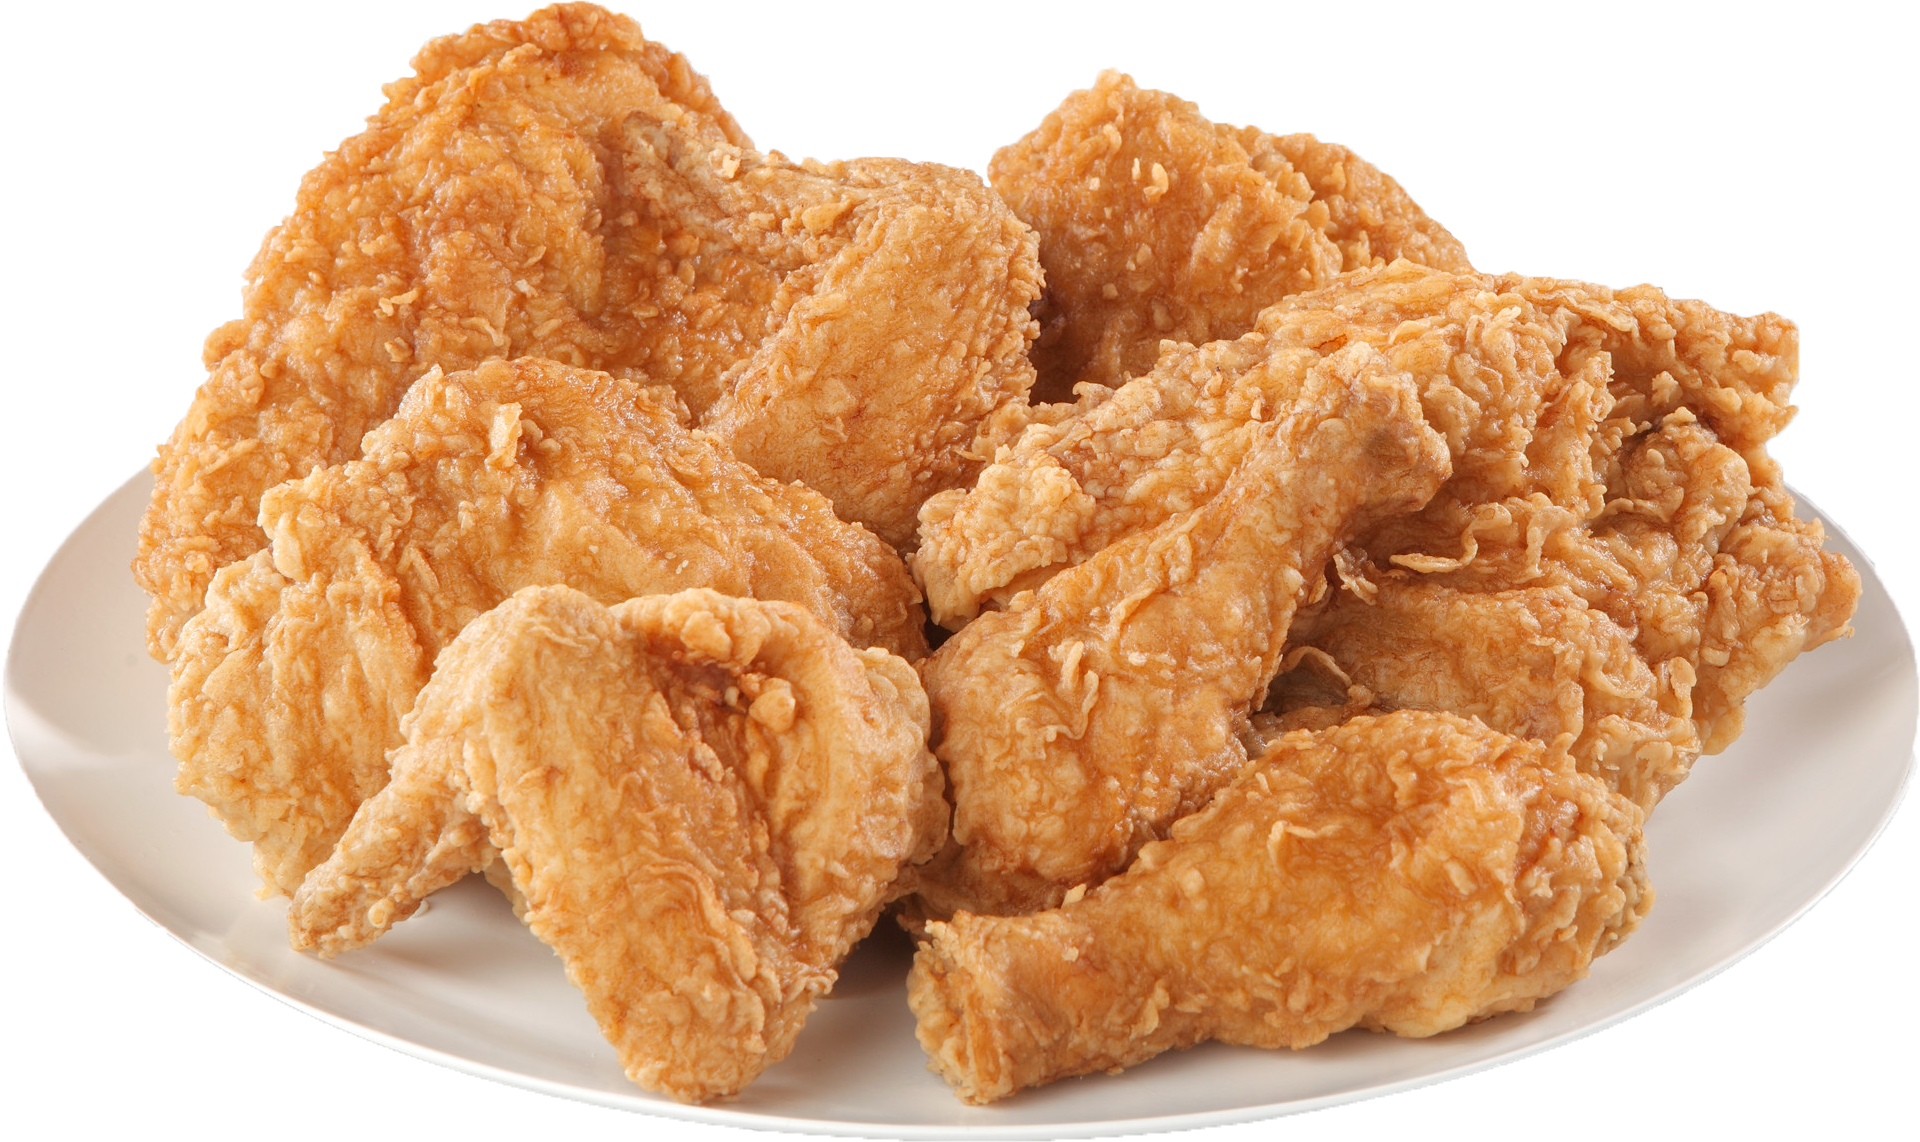 Popeyes Chicken Fried Crispy Free Download Image PNG Image